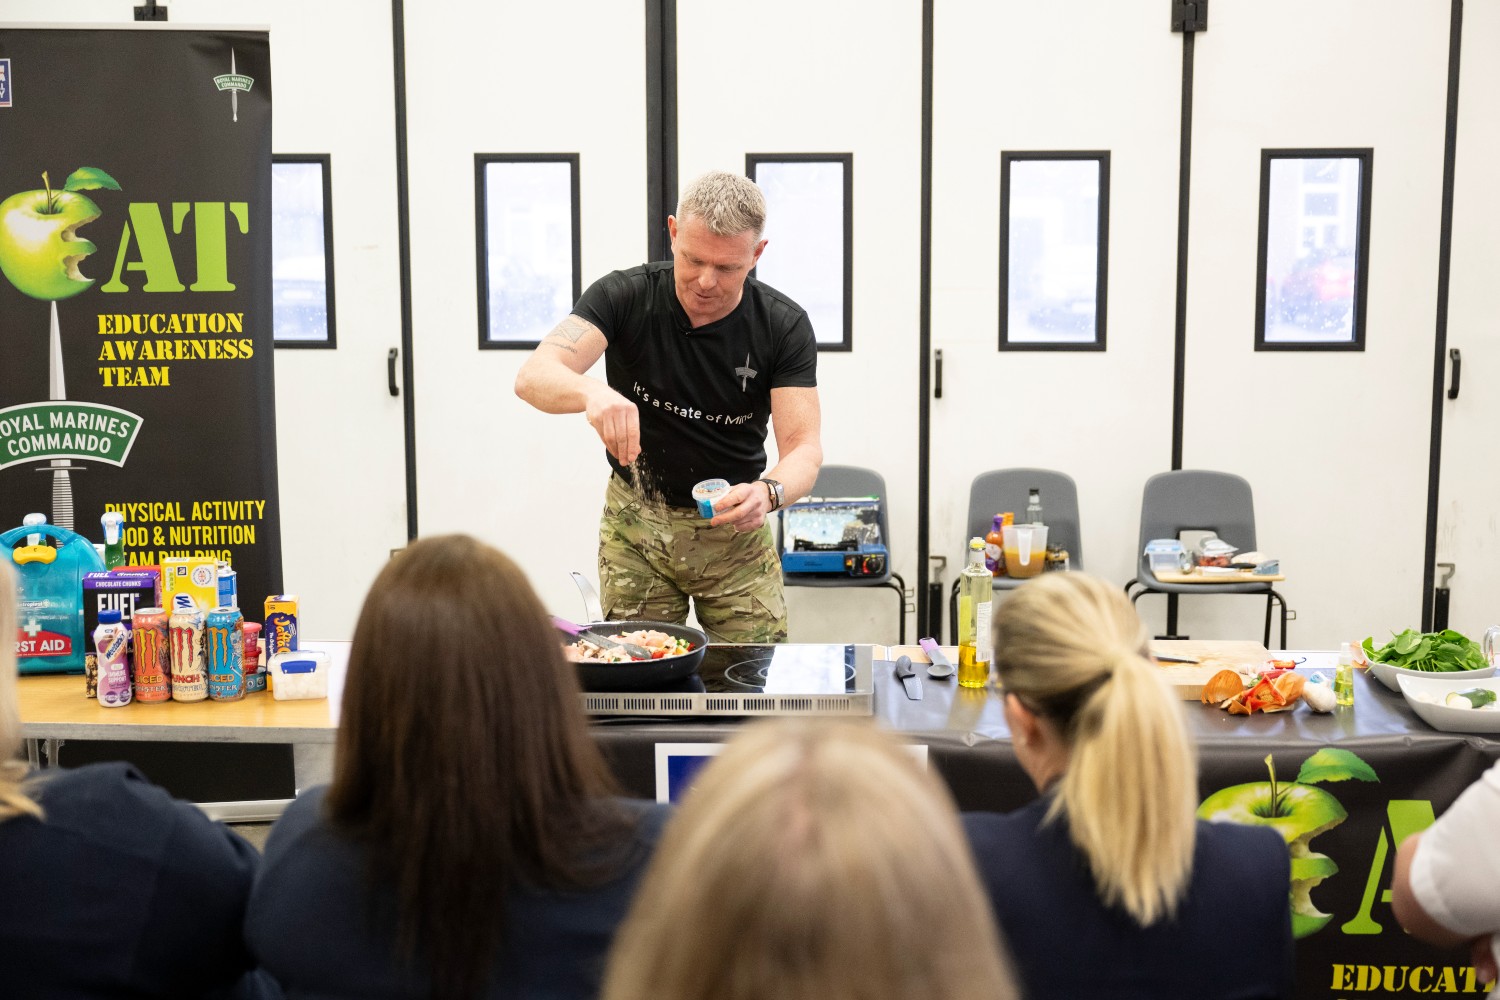 Commando Chef giving a demo with an audience.